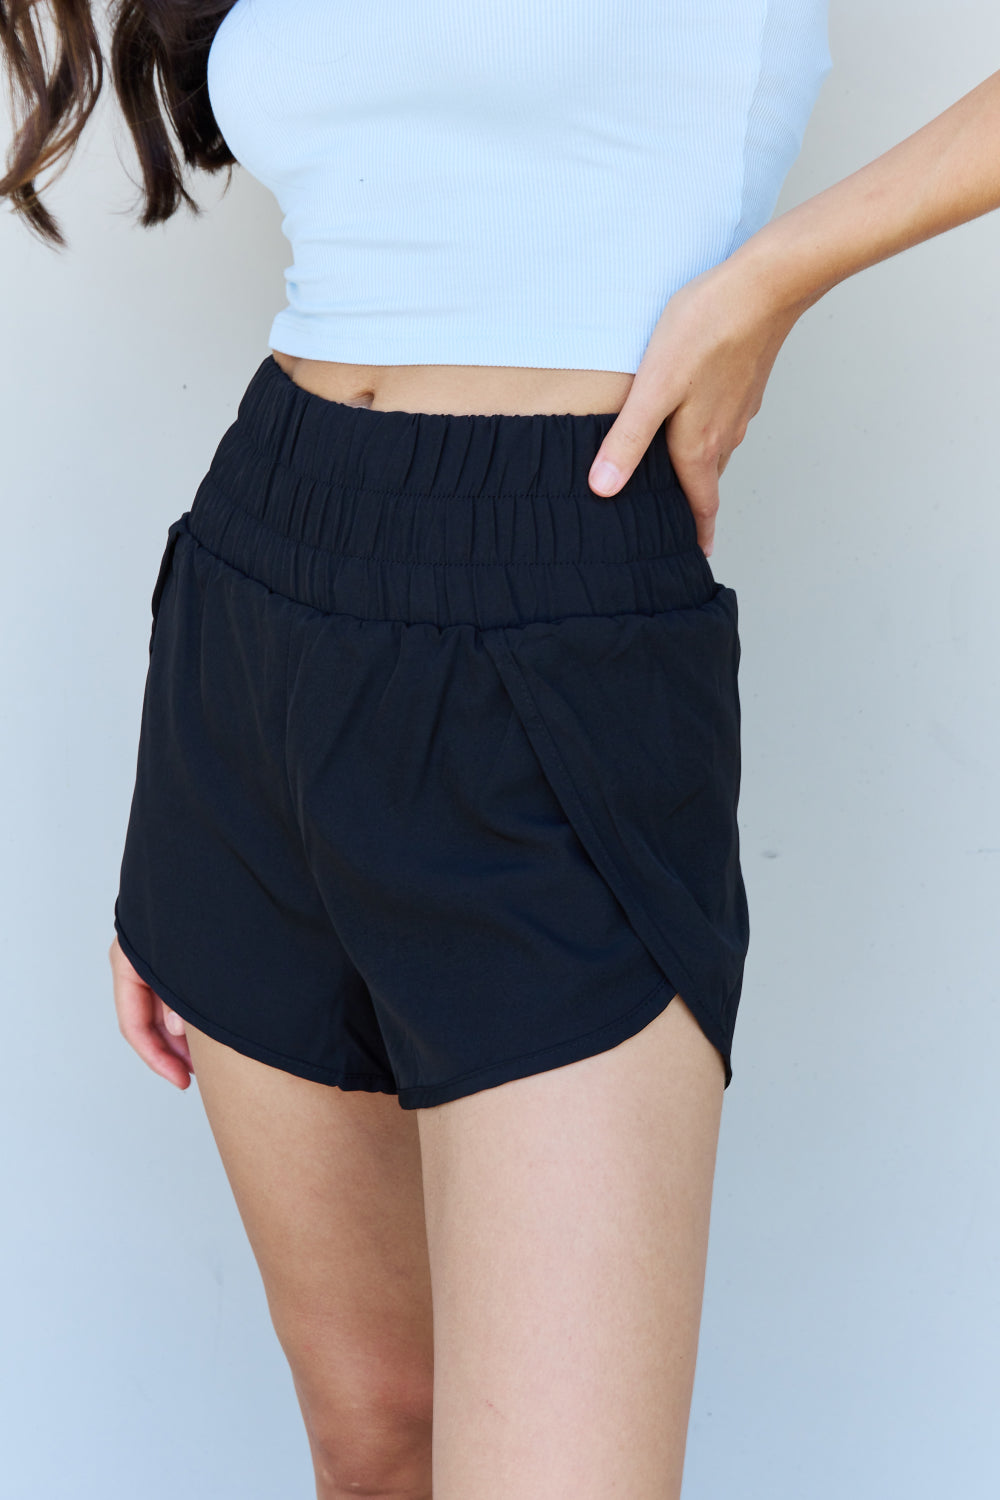 Stay Active High Waistband Active Shorts in Black